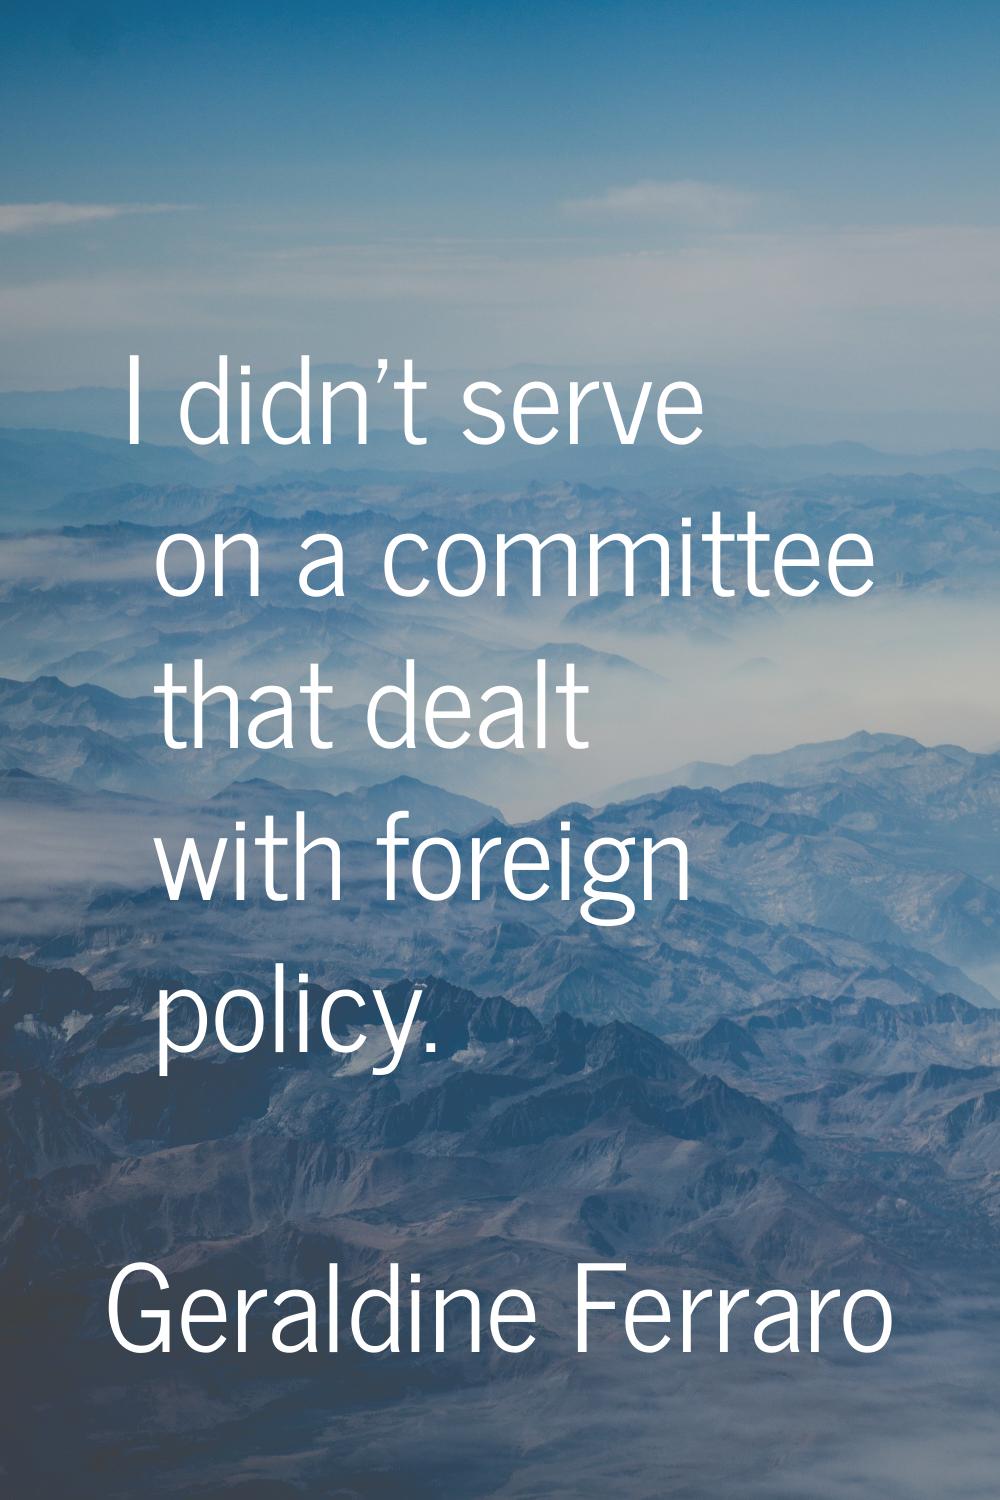 I didn't serve on a committee that dealt with foreign policy.